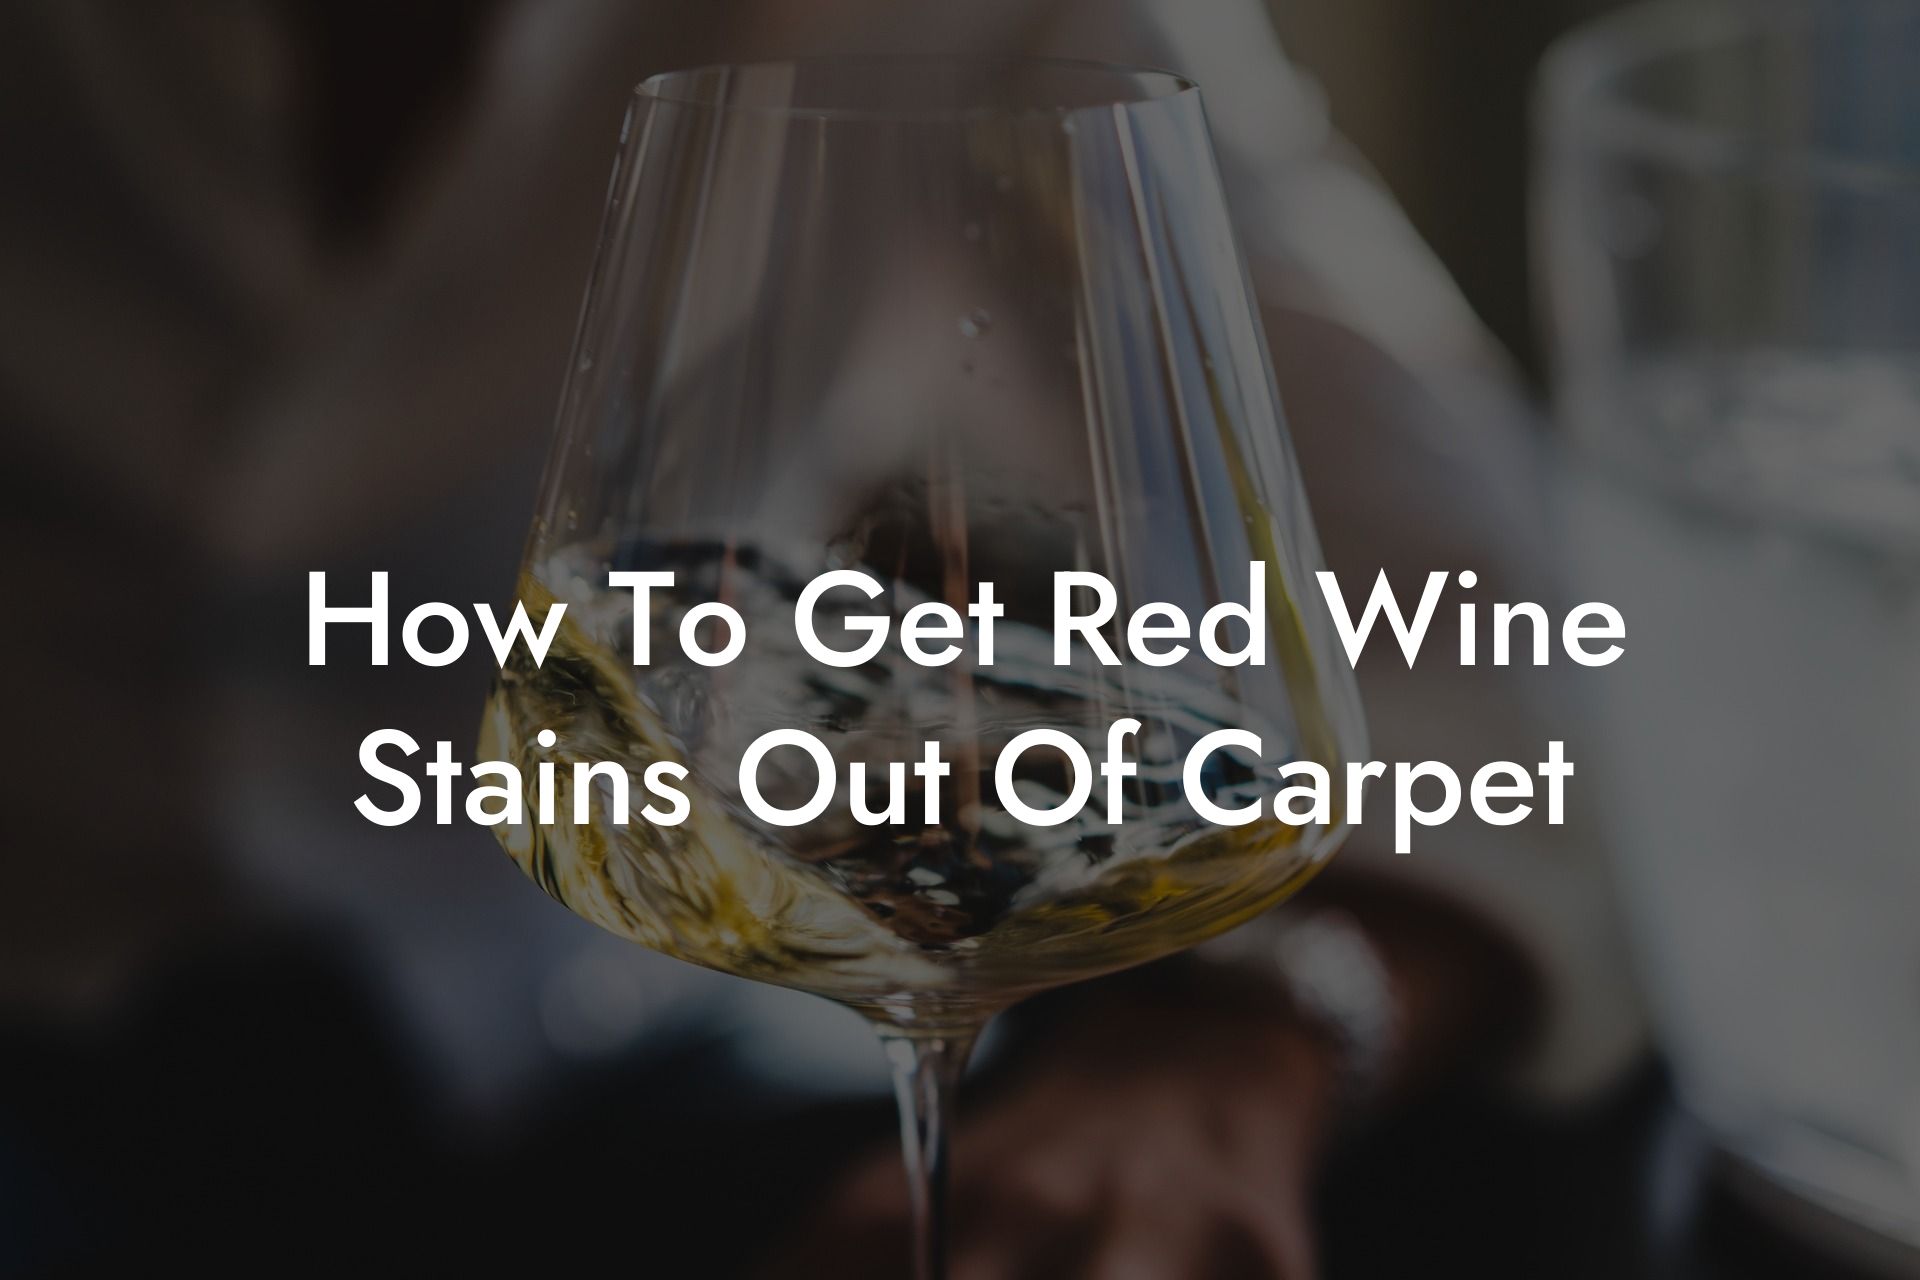 How To Get Red Wine Stains Out Of Carpet